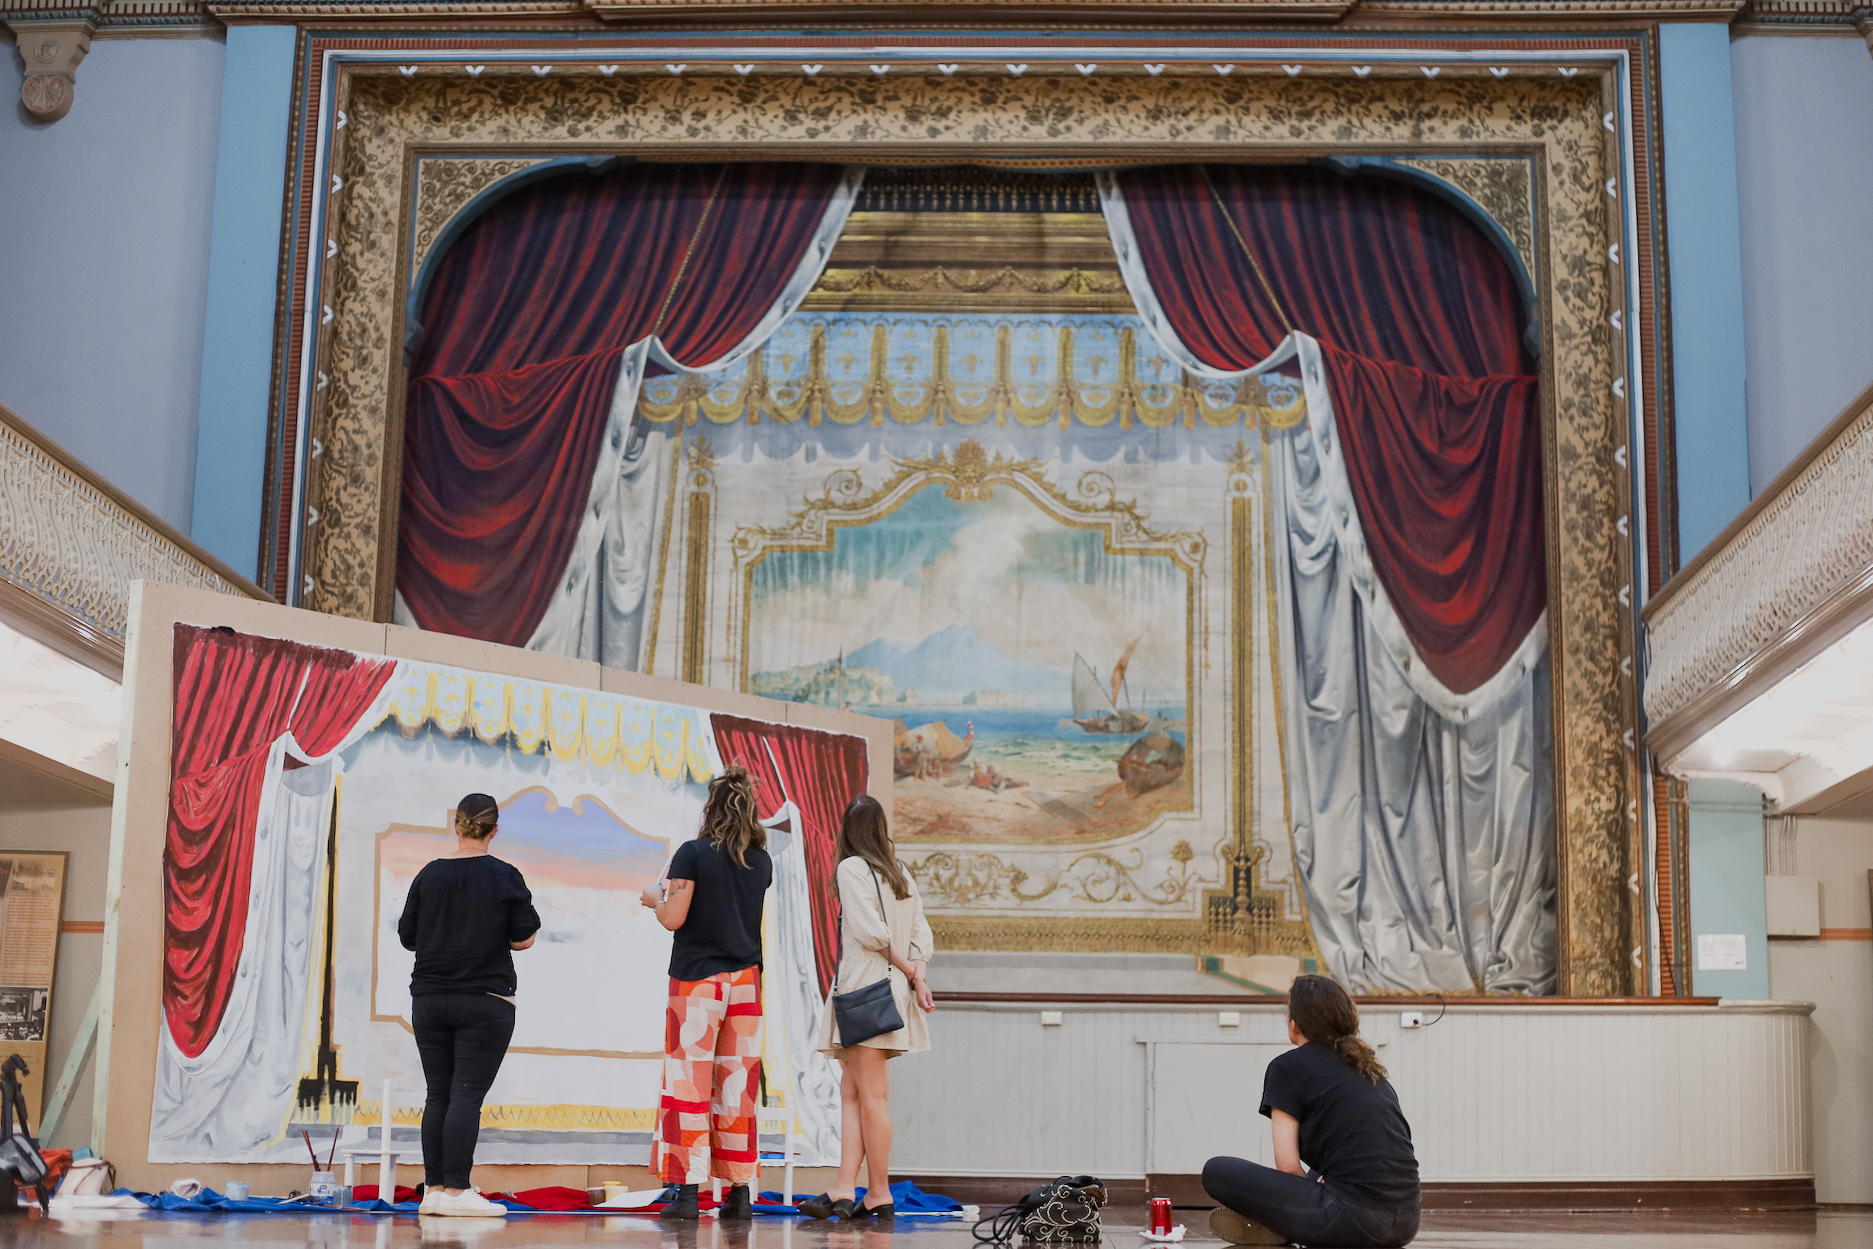 People stand before an artwork featuring red curtains in front of an even larger artwork of red curtains.